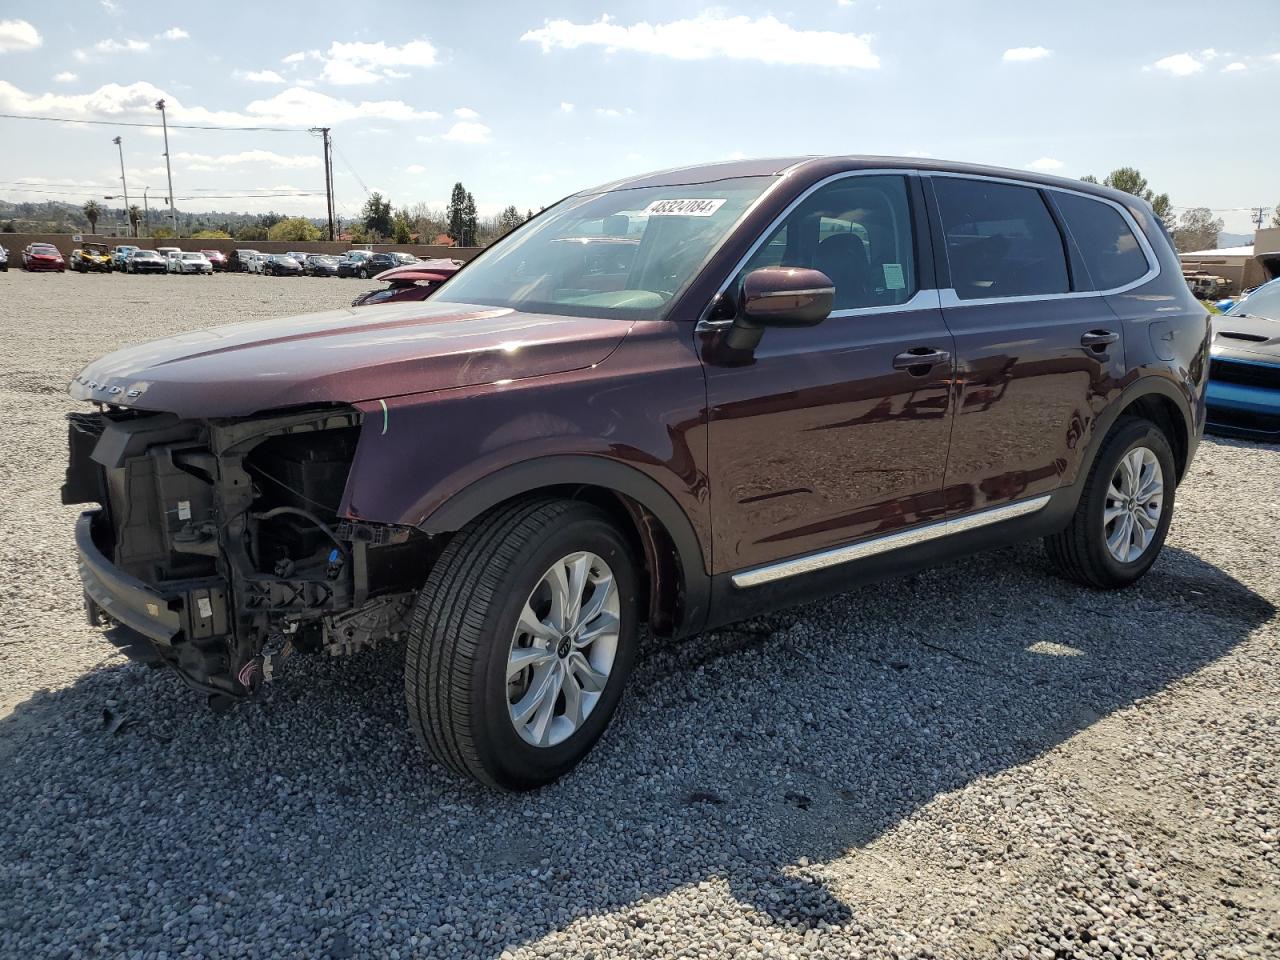 vin: 5XYP2DHC1MG142985 5XYP2DHC1MG142985 2021 kia telluride 3800 for Sale in 92359, Ca - Mentone, Mentone, USA